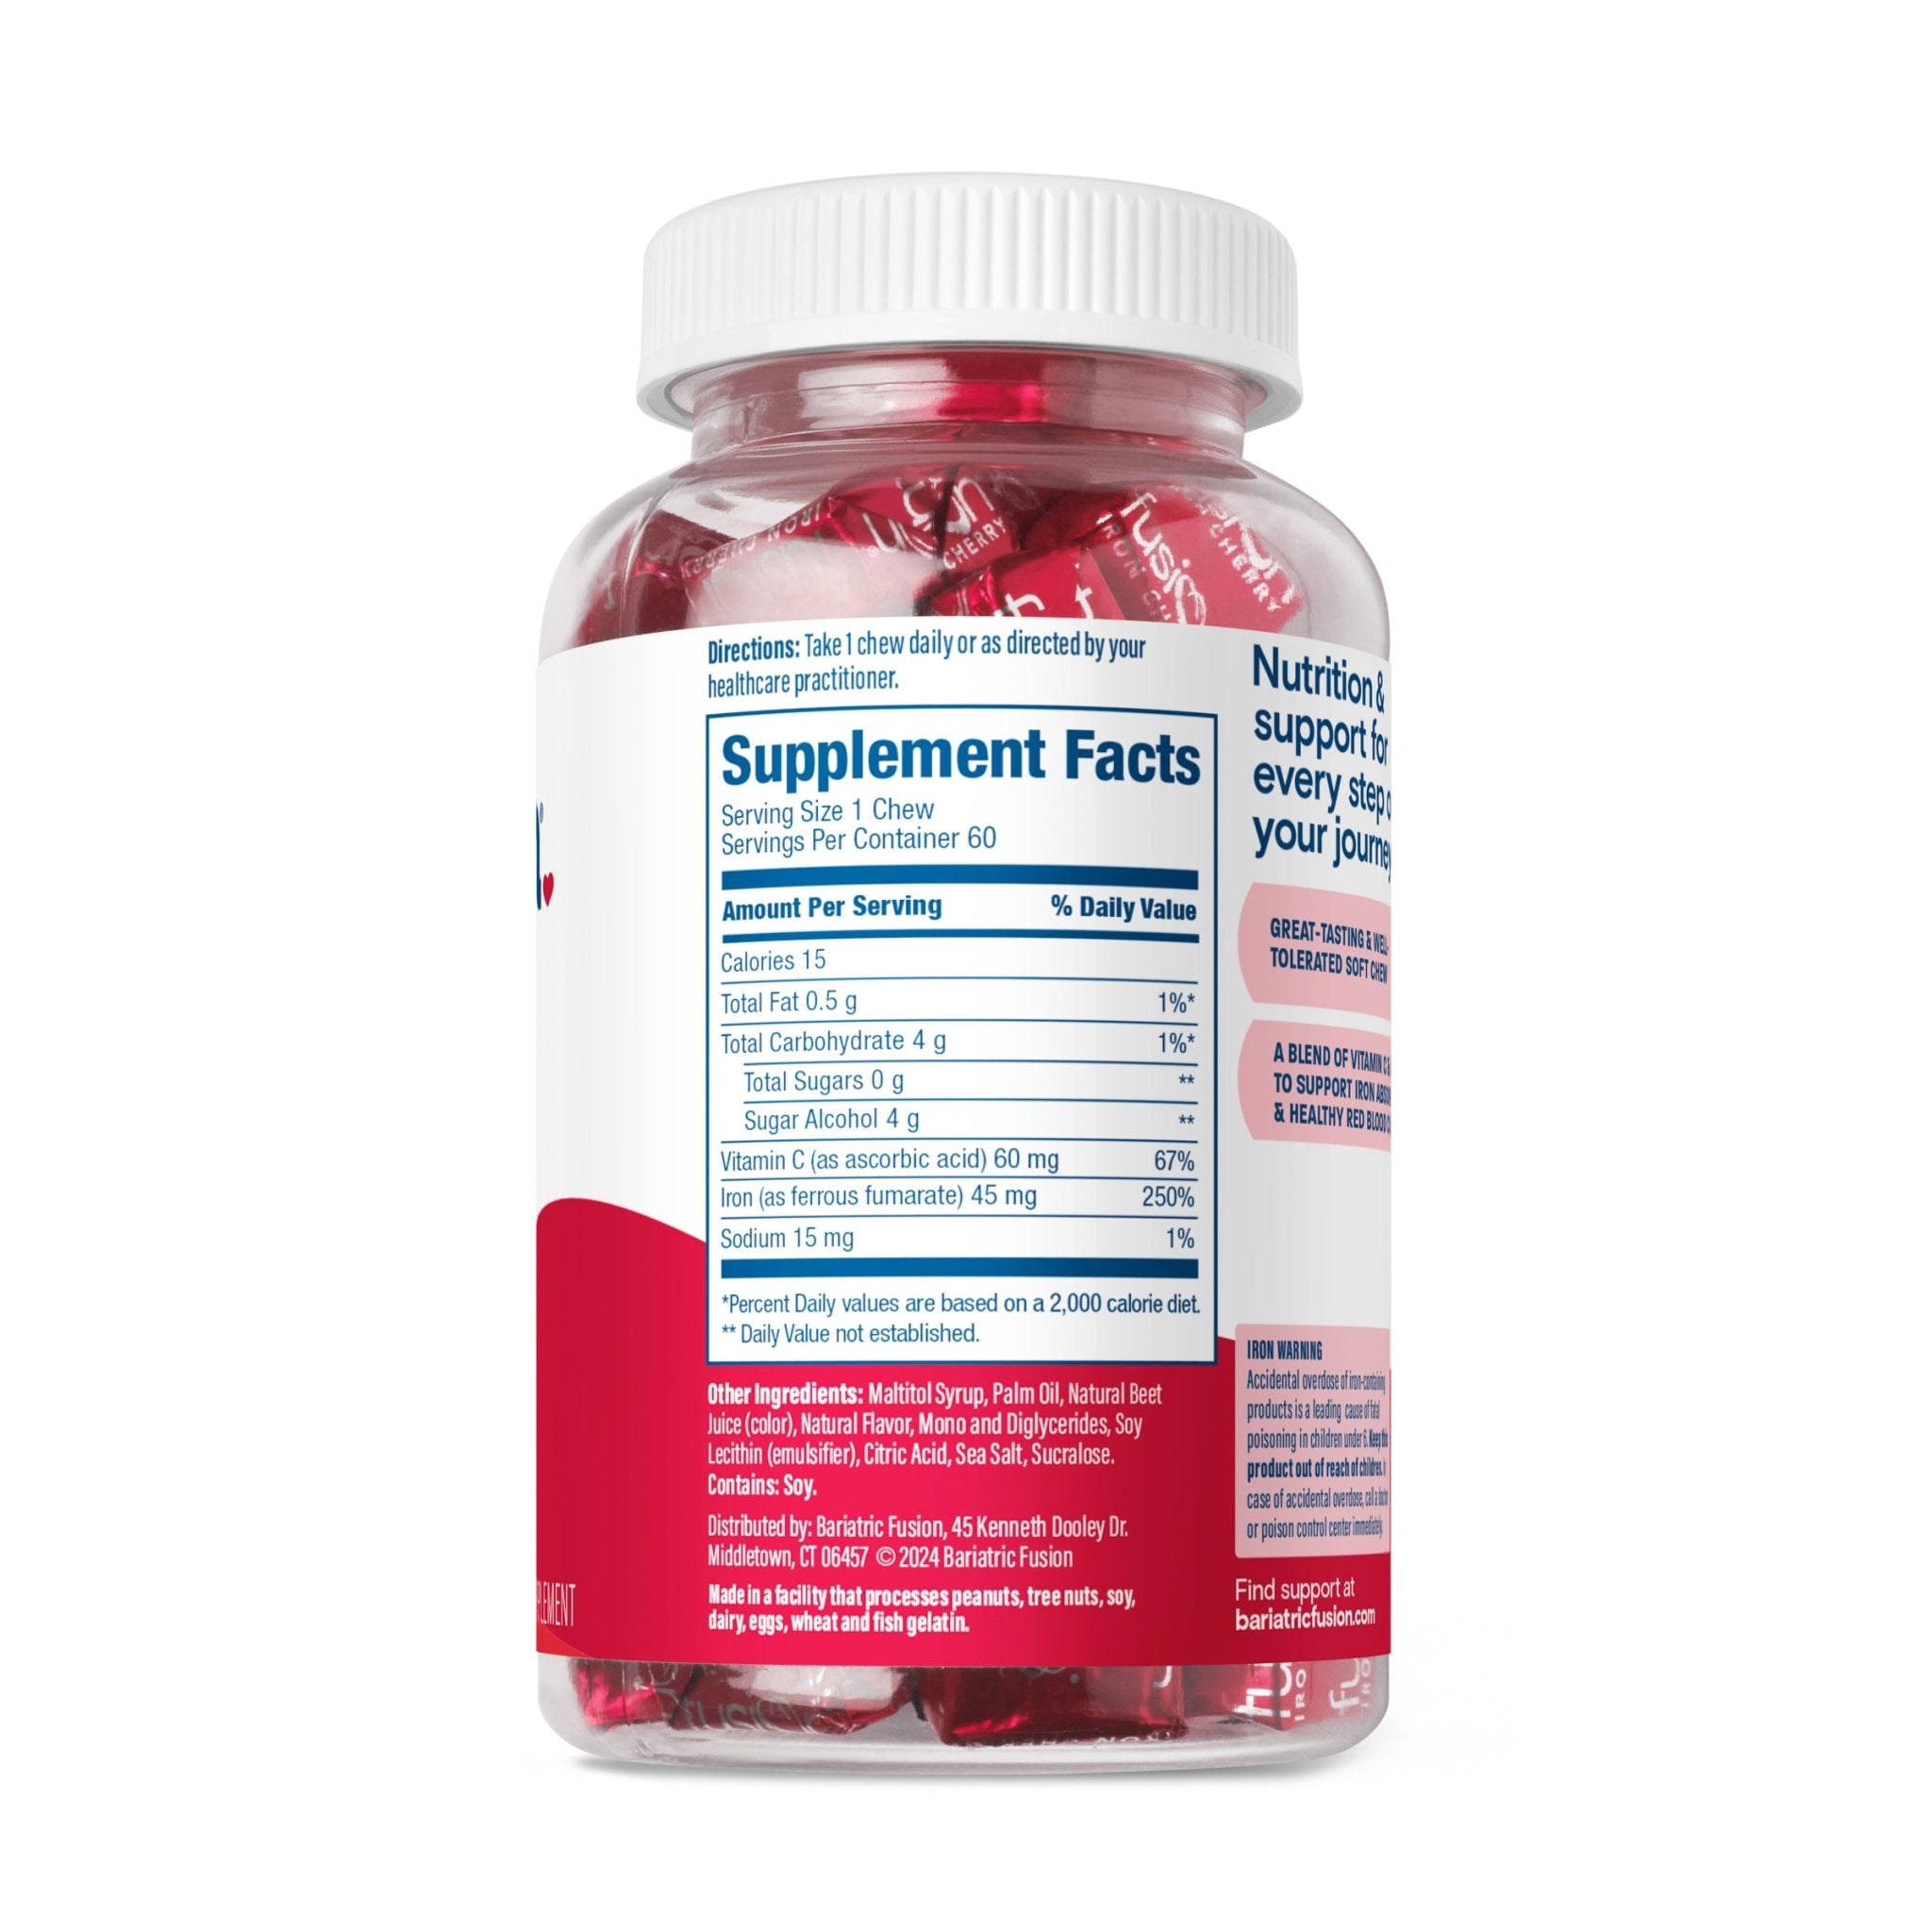 Cherry Bariatric Iron Soft Chew with Vitamin C directions and servings details.